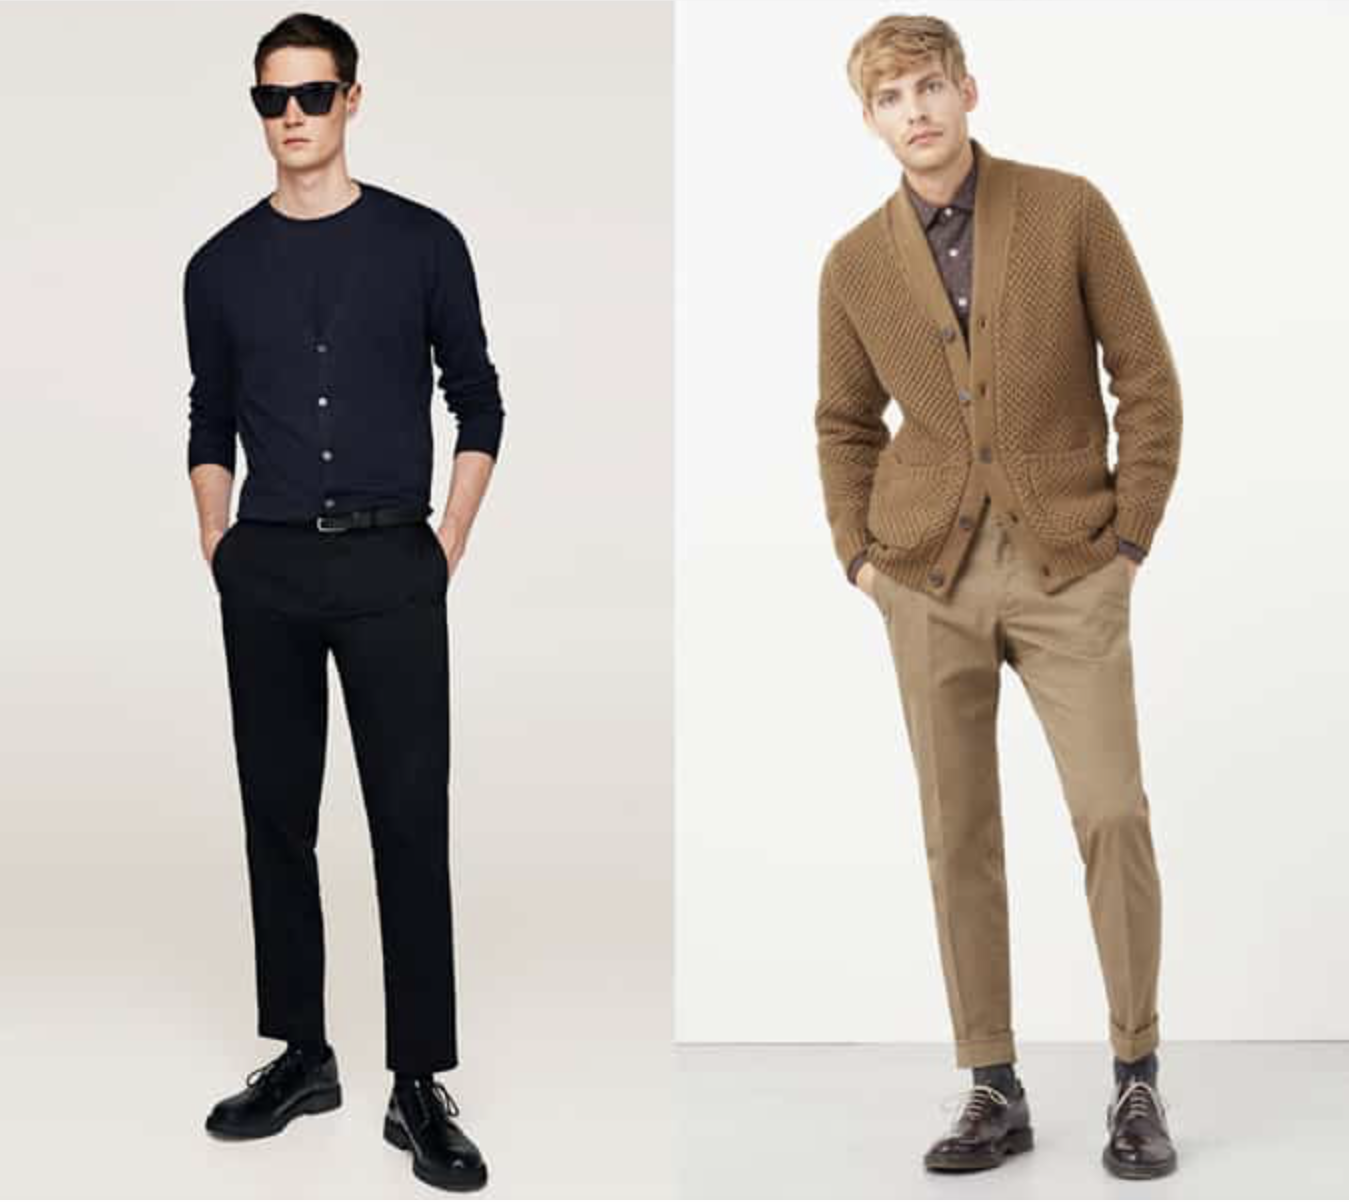 Office Friendly Fall Outfit Ideas - Men and Women Edition - 303 Magazine